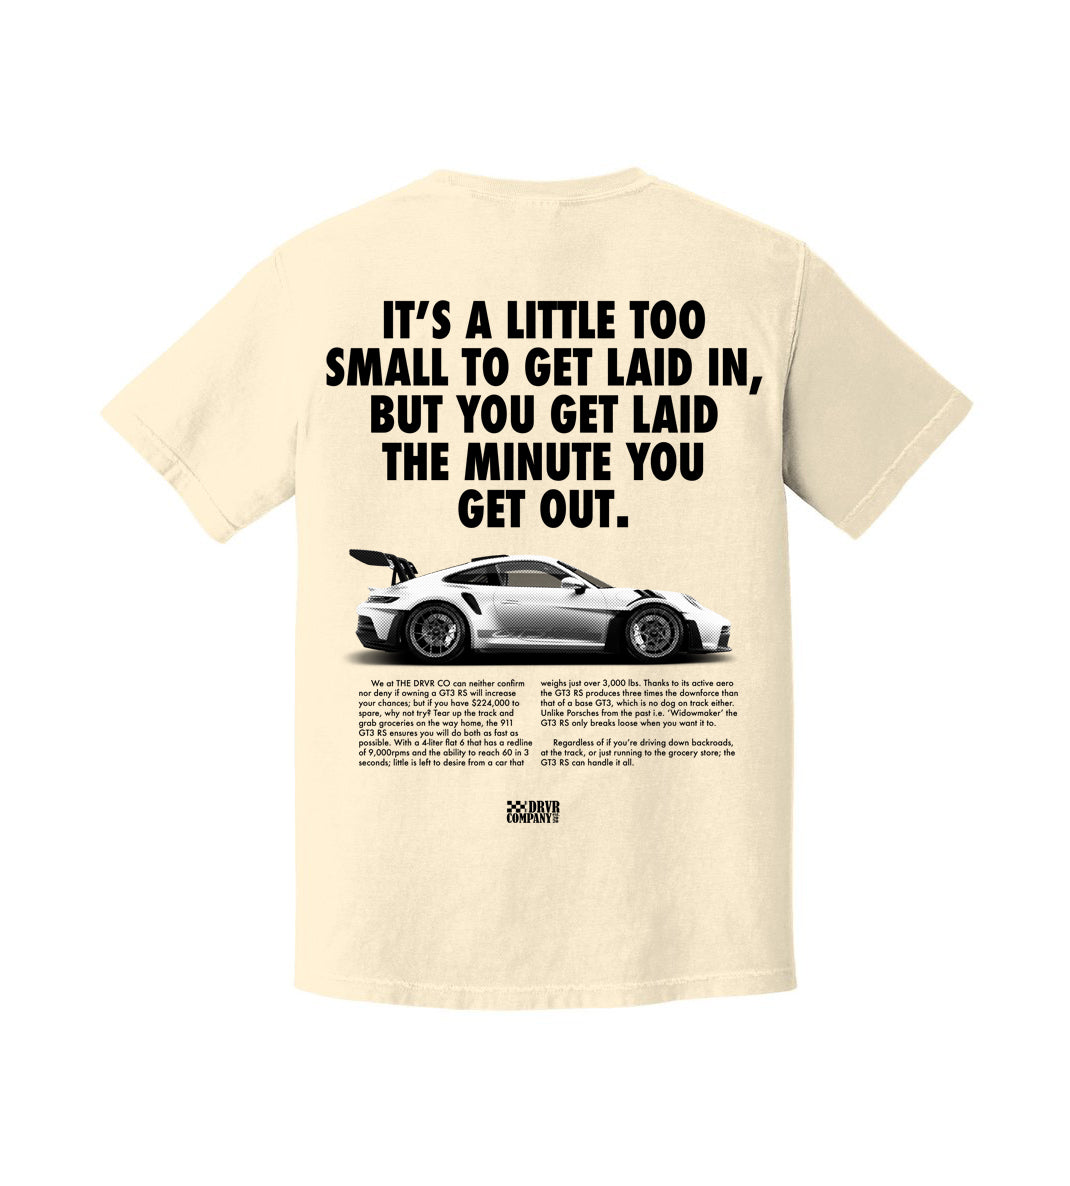 thedrvrco rear render for porsche gold digger tee